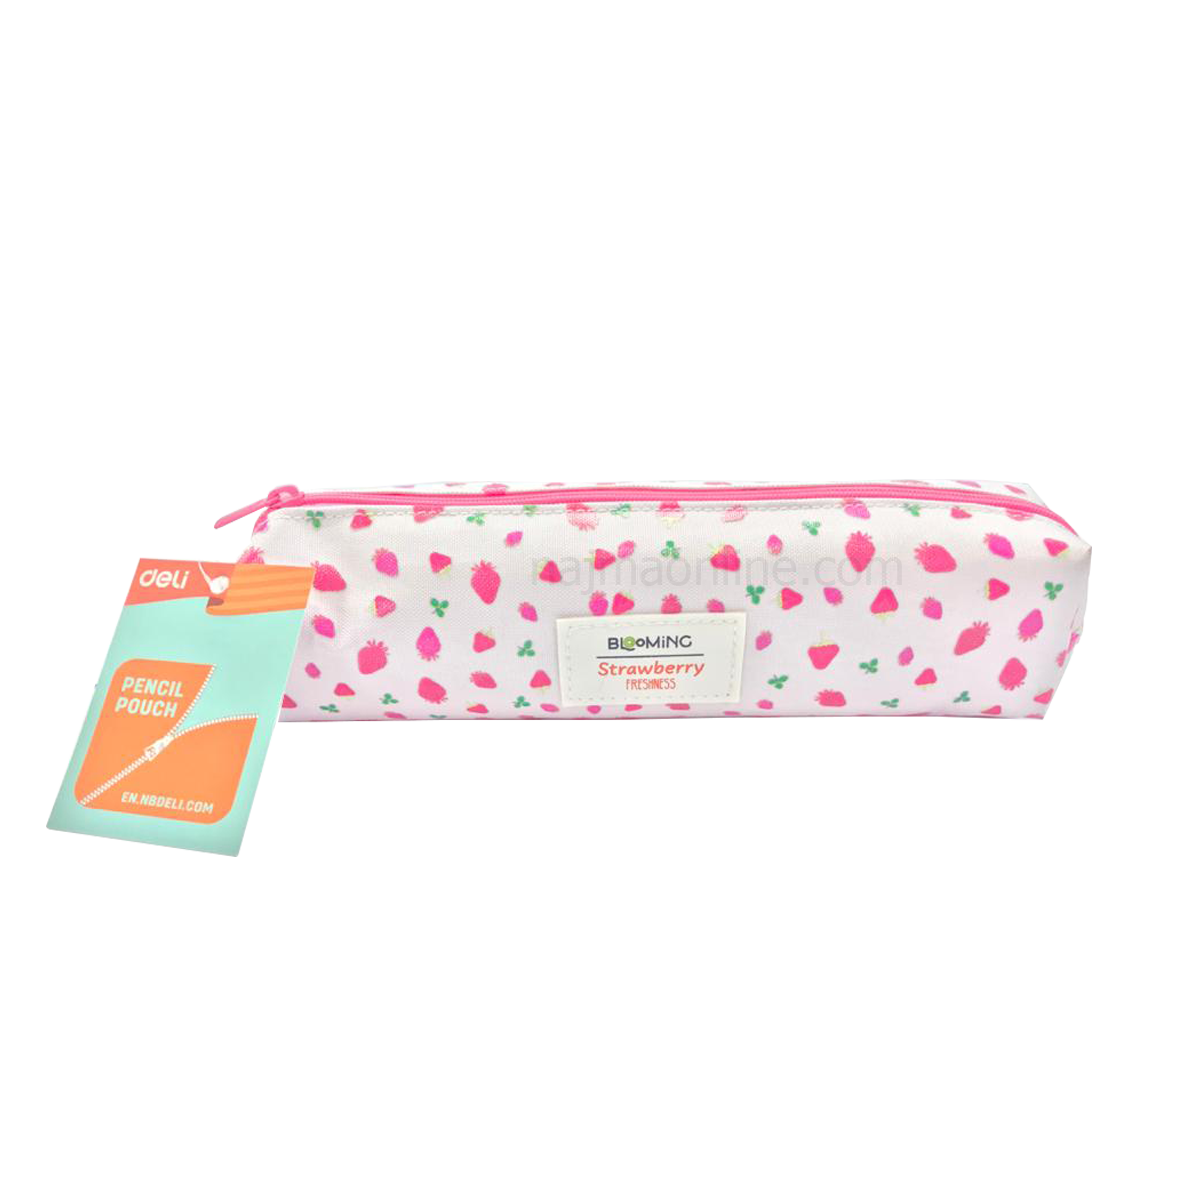 White and Pink Color Pencil Case